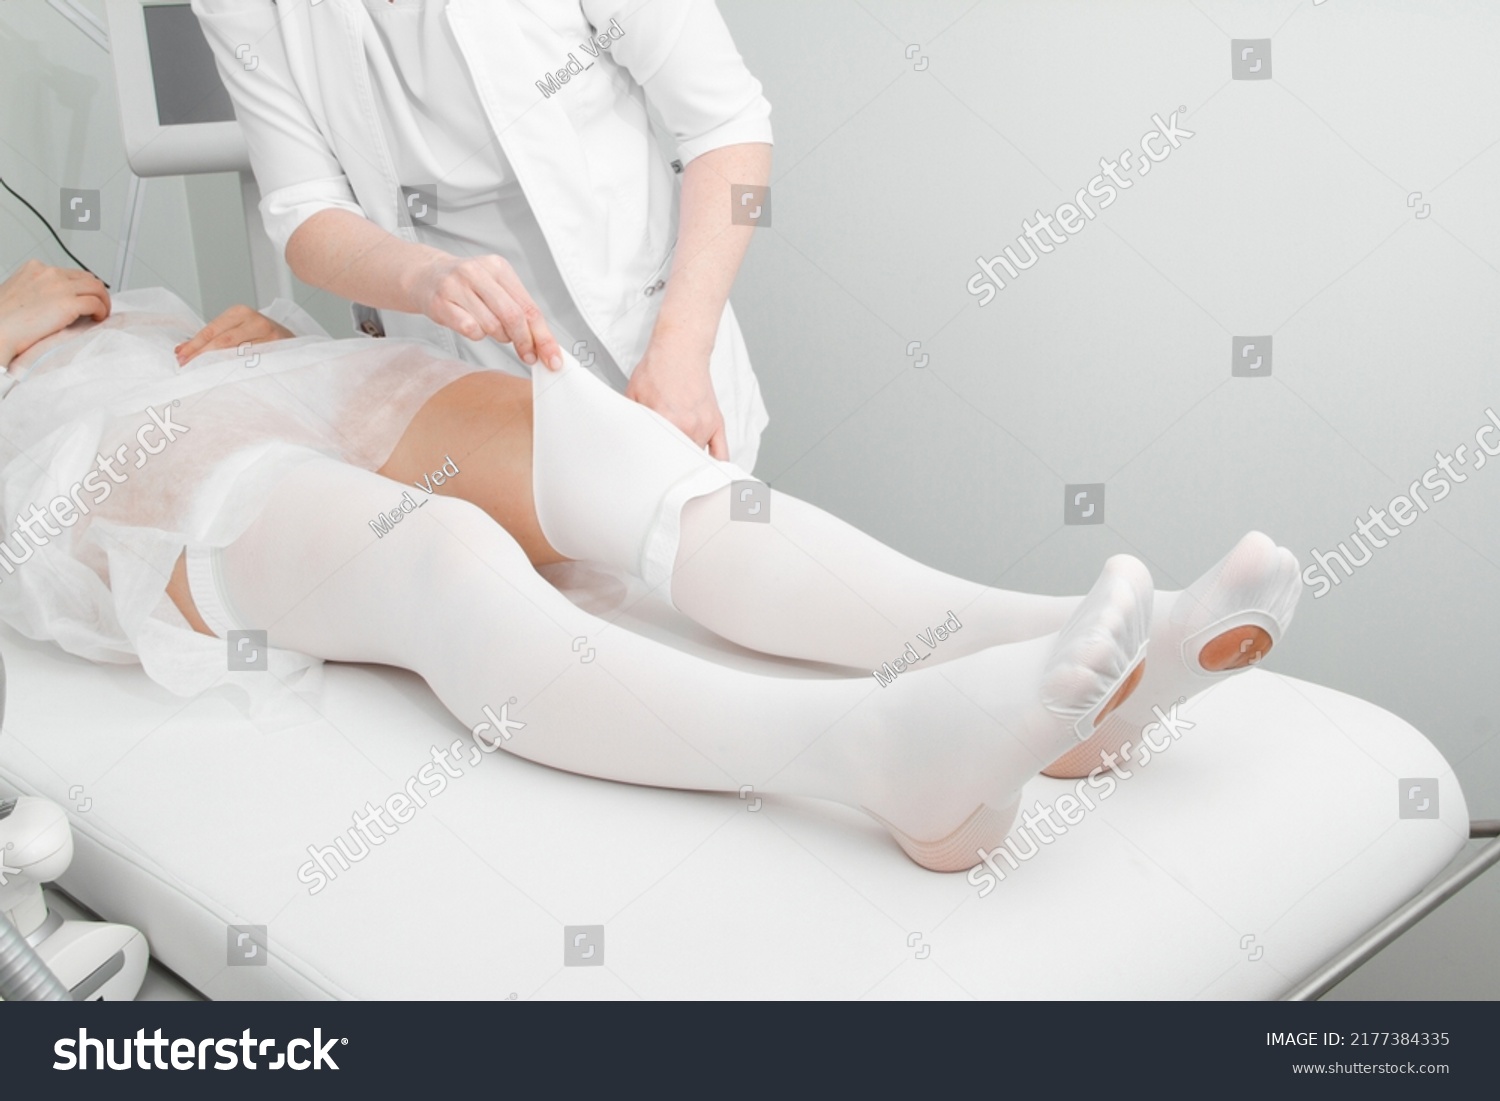 Anti-embolic Compression Hosiery for surgery isolated on white. Medical white stockings, tights for varicose veins and venouse therapy. Thrombo embolic deterrent hose or anti-embolism stockings. #2177384335